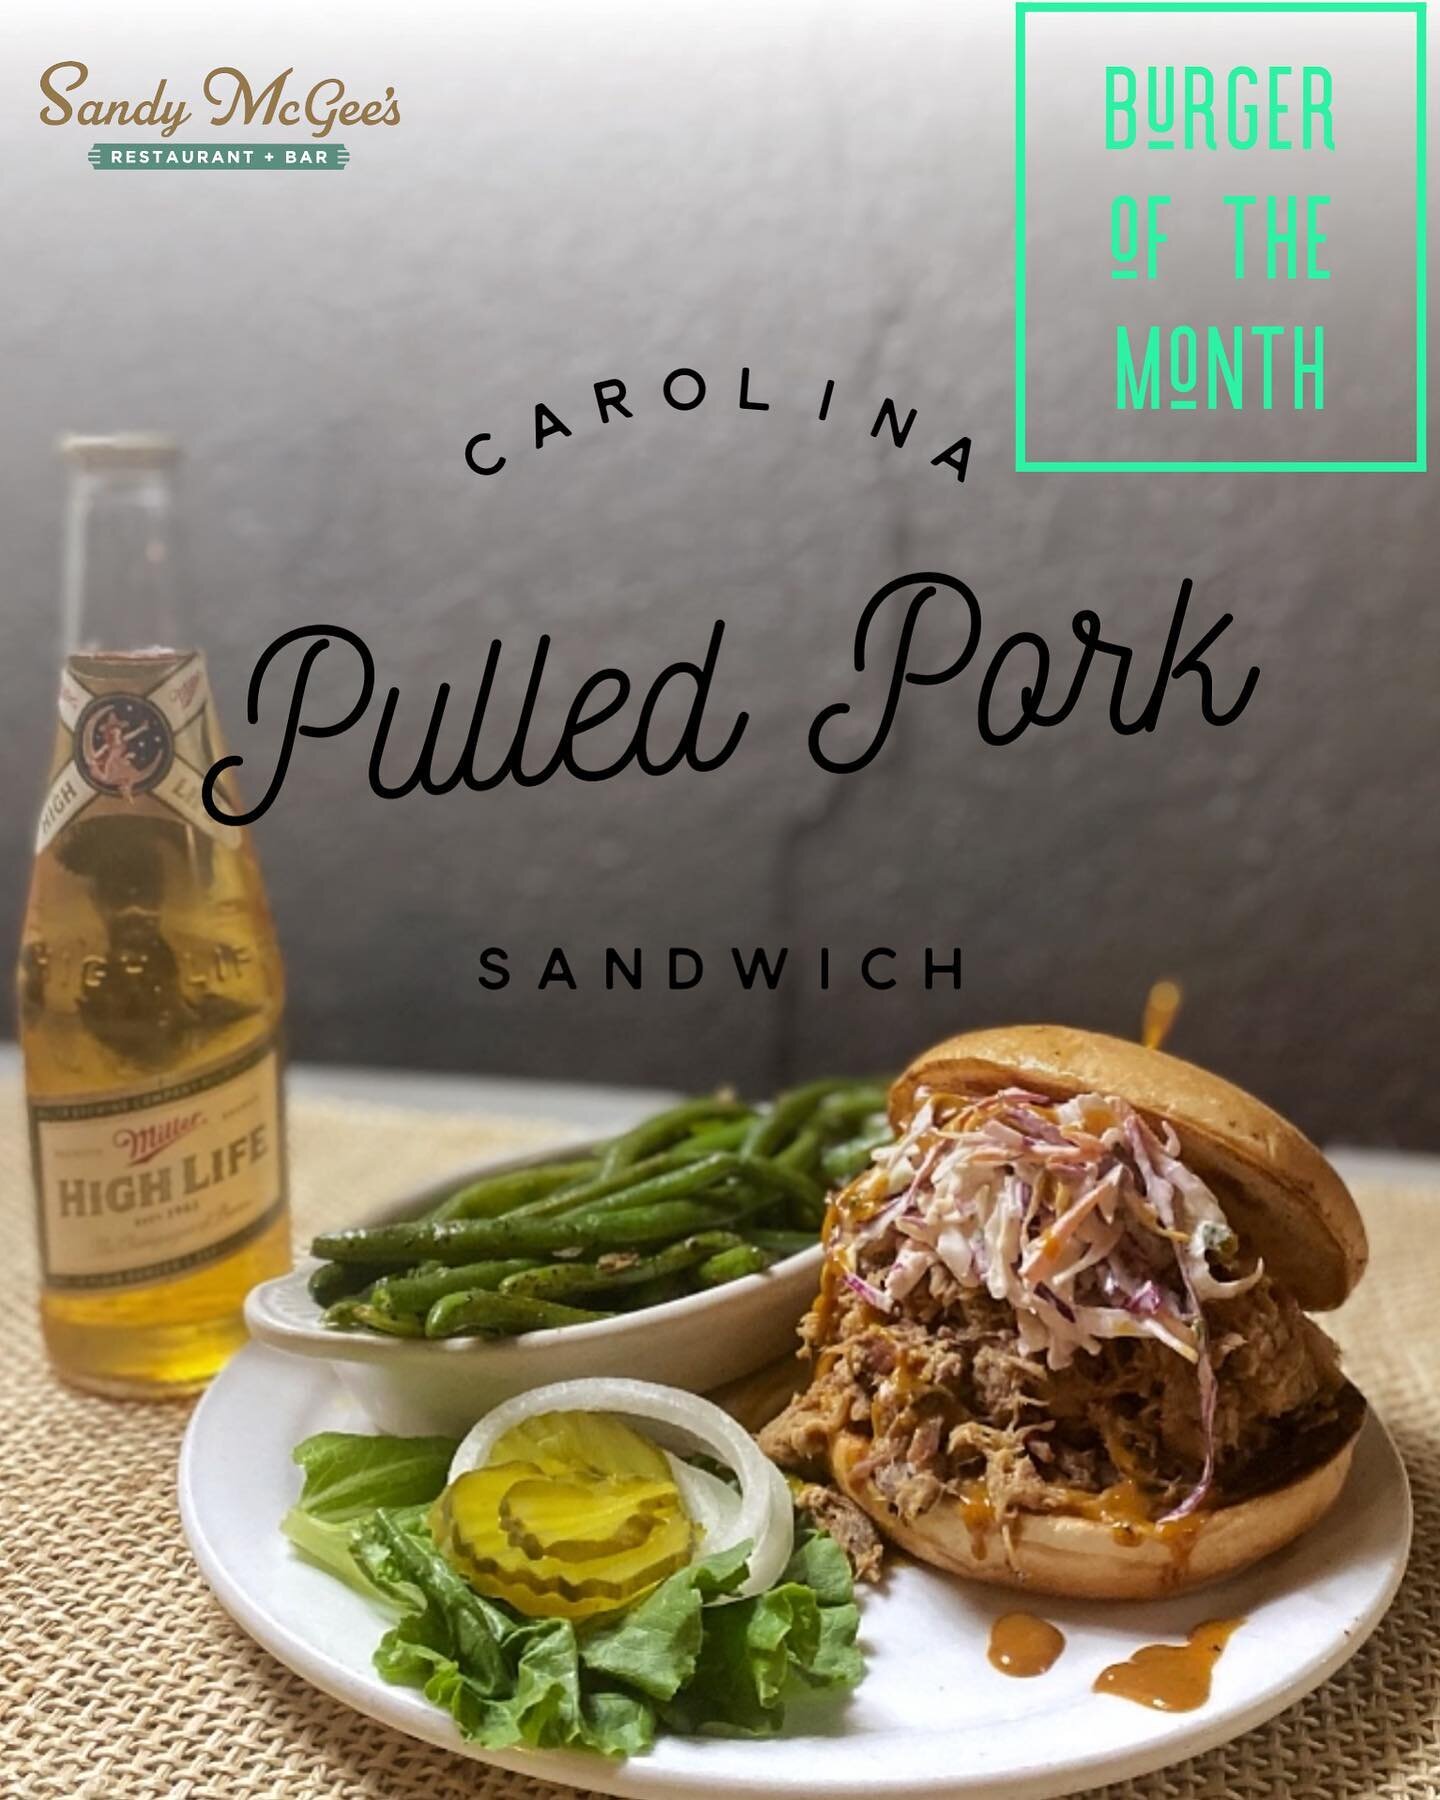 We&rsquo;re back!!!
🍔🐖🍖🍔🐖🍖🍔🐖🍖🍔🐖🍖
The Carolina Pulled Pork Sandwich features slow-cooked pork shoulder seasoned and tossed in a tangy Carolina-style BBQ sauce. Topped with a house-made Fennel/Cabbage Coleslaw and more BBQ sauce! Served wit